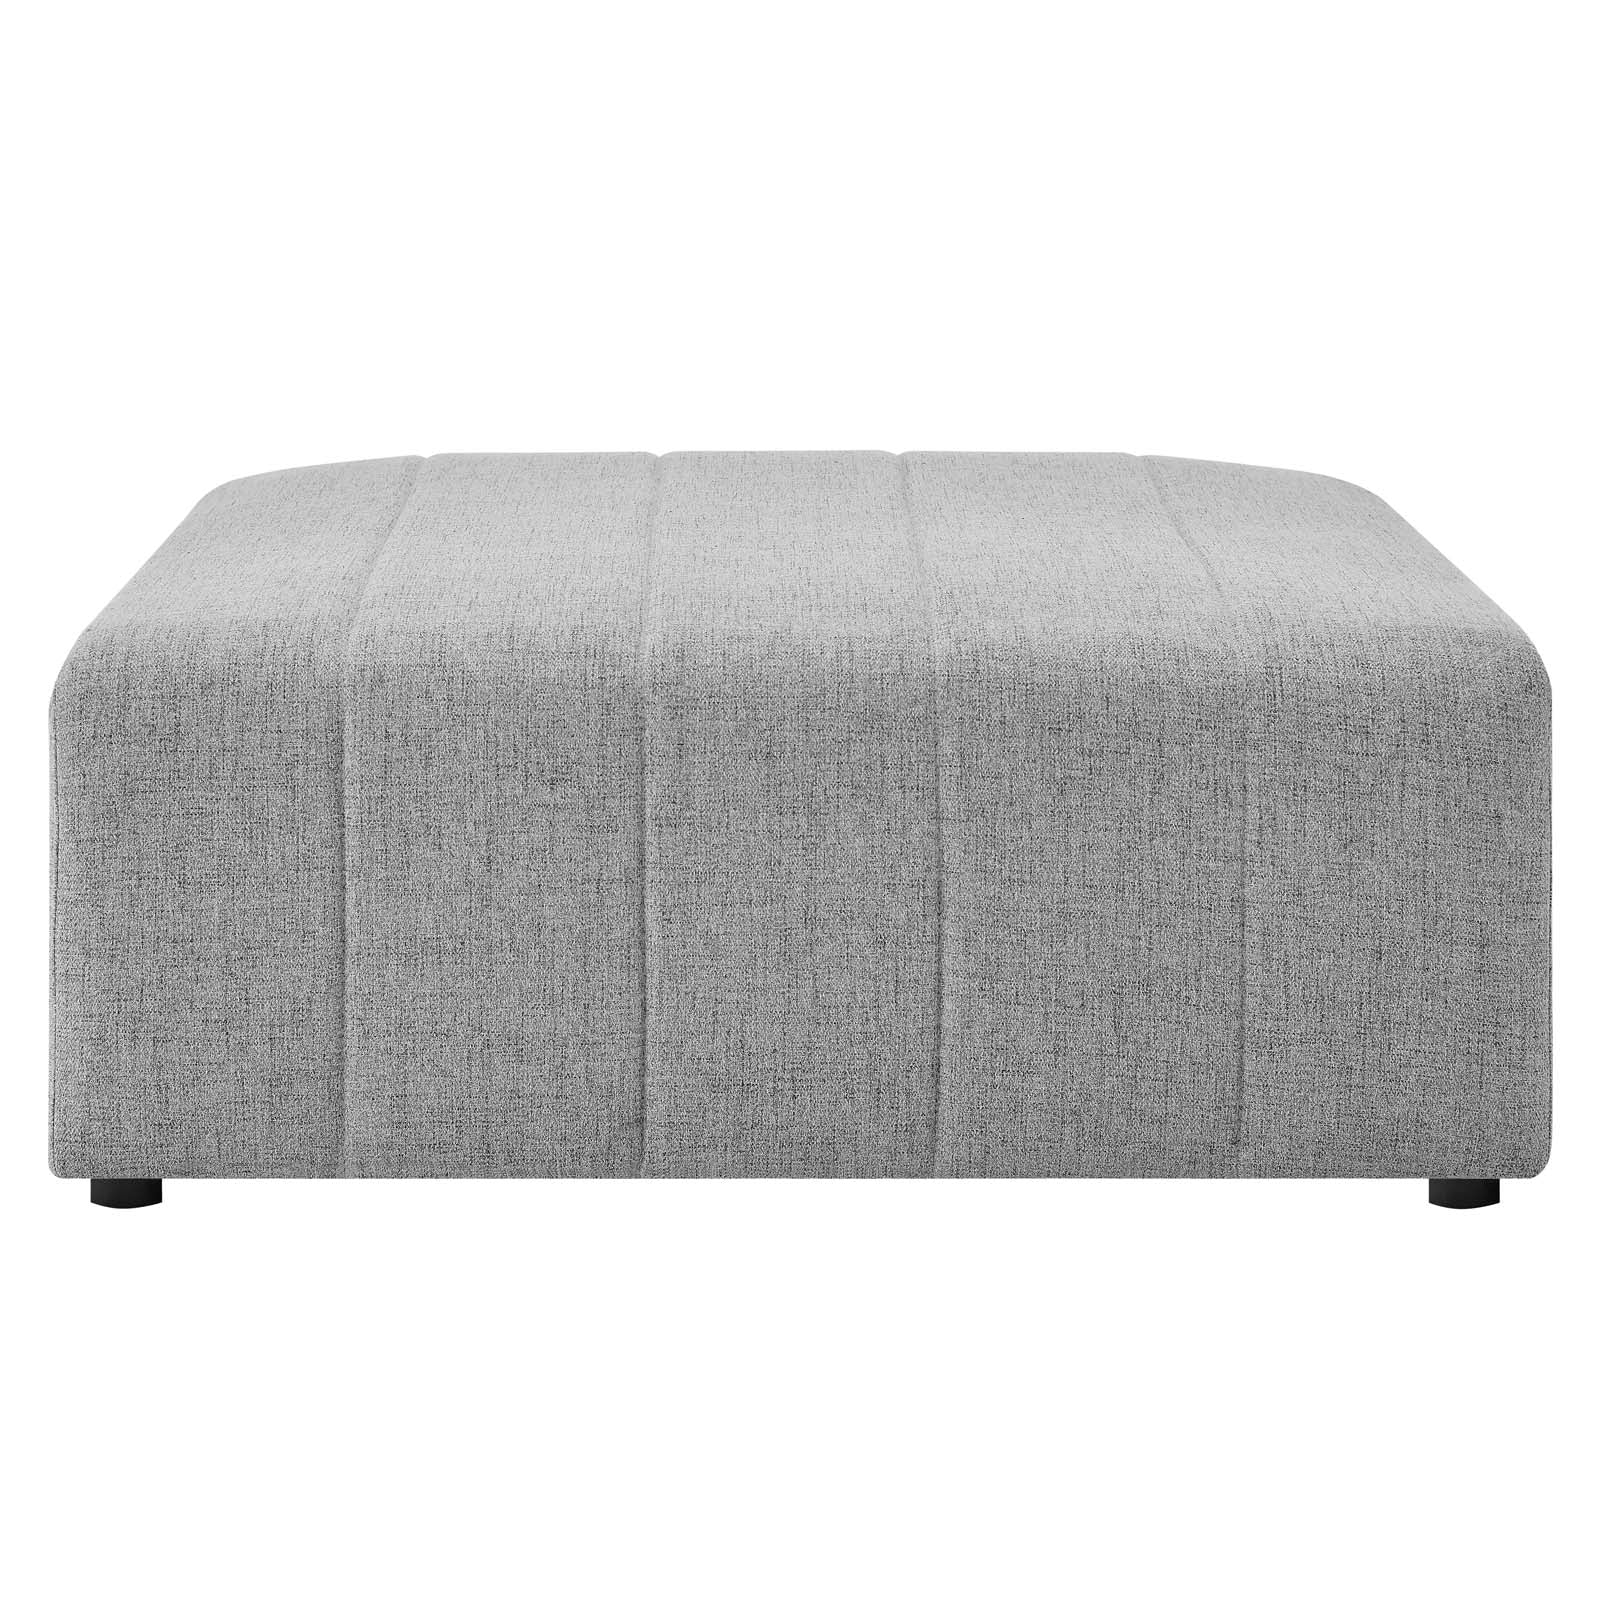 Modway Sectional Sofas - Bartlett Upholstered Fabric 6-Piece Sectional Sofa Light Gray